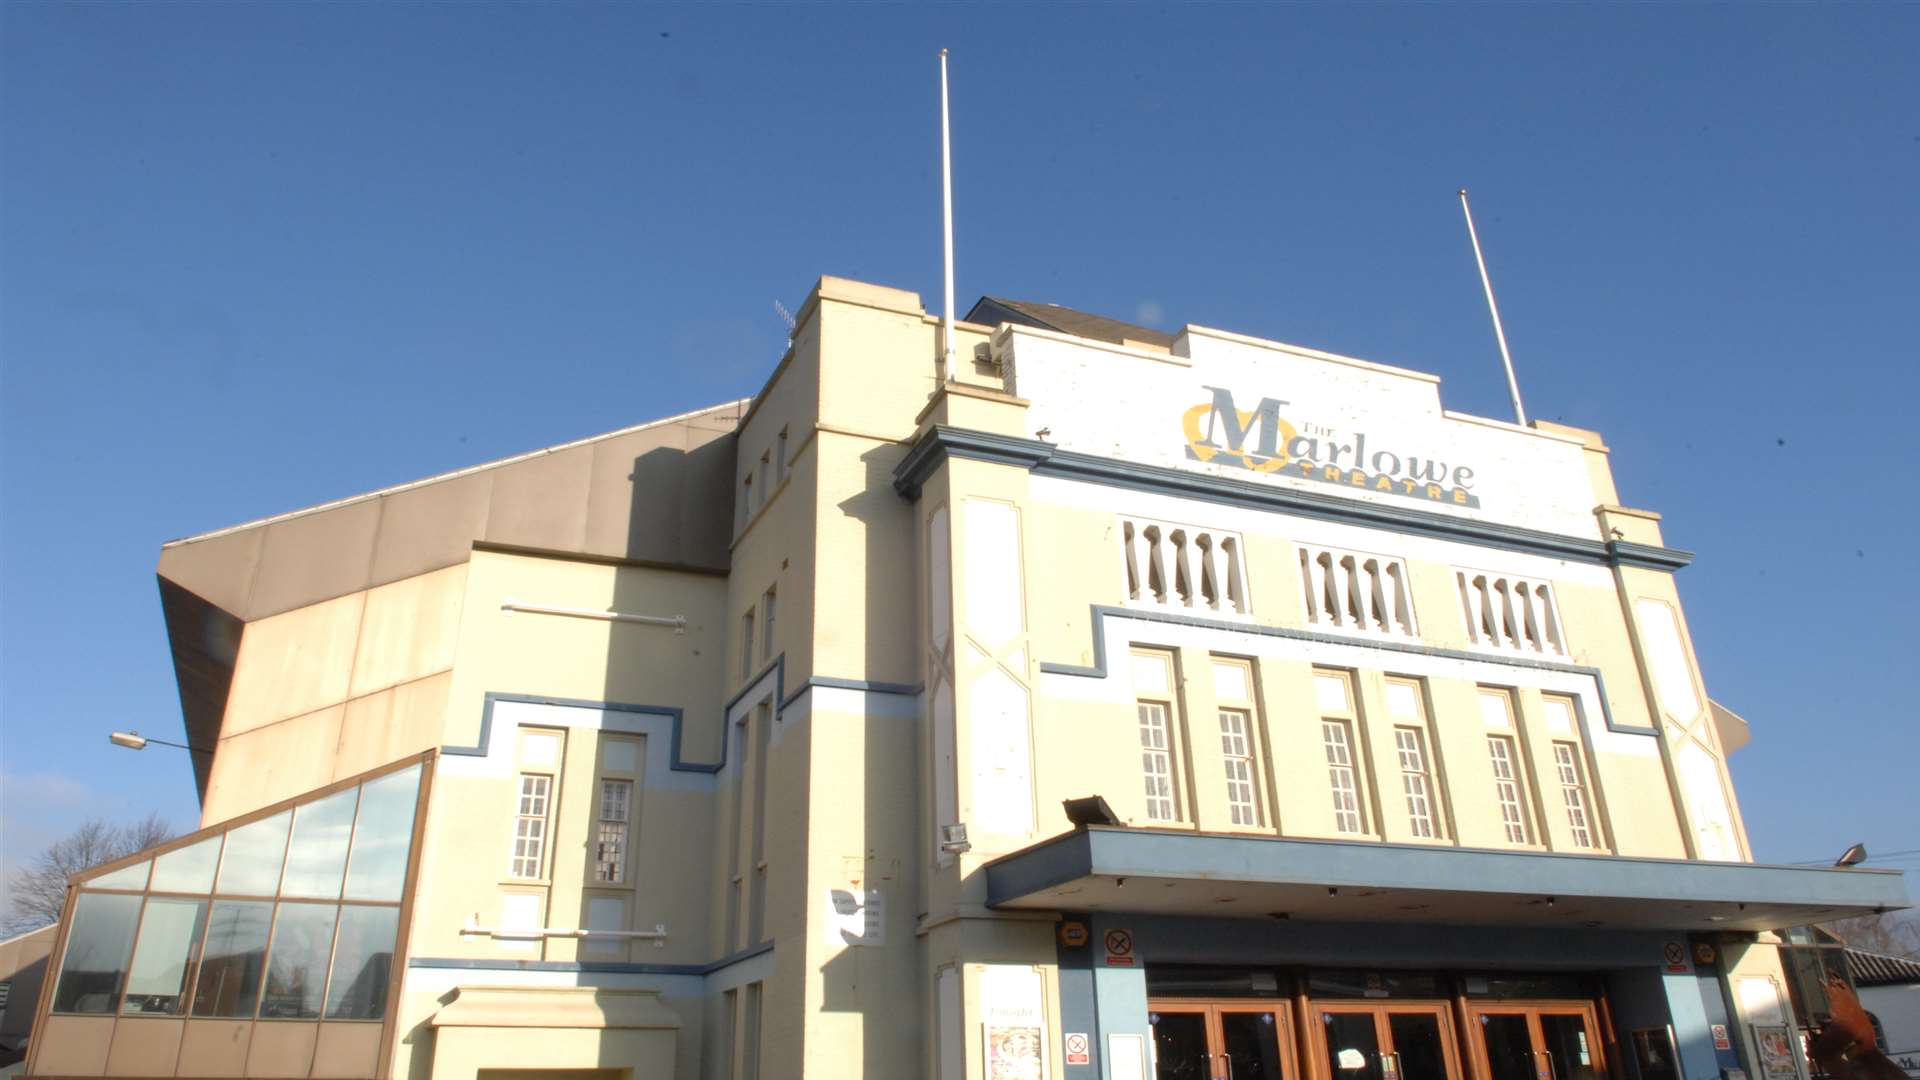 The Marlowe Theatre as it was before it closed in 2009 to be demolished and rebuilt on the same spot